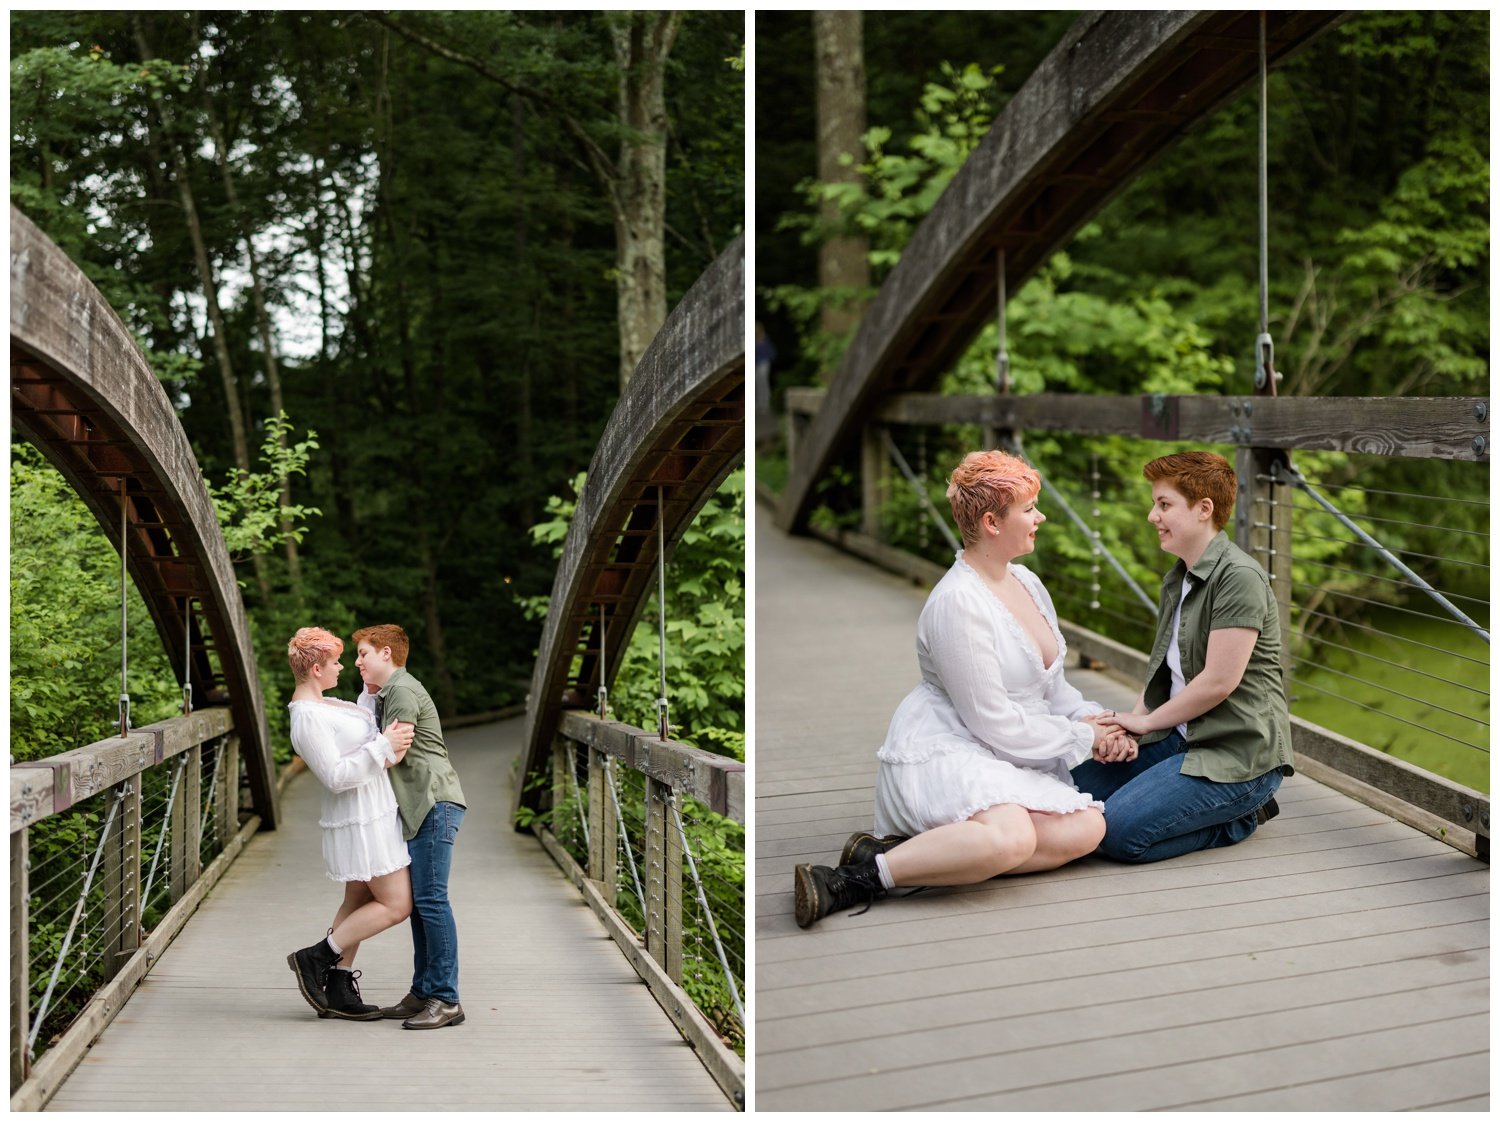 Queer-Engagement-Photos-Longwood-Gardens-Philly-Photographer-LGBTQ-12.jpg